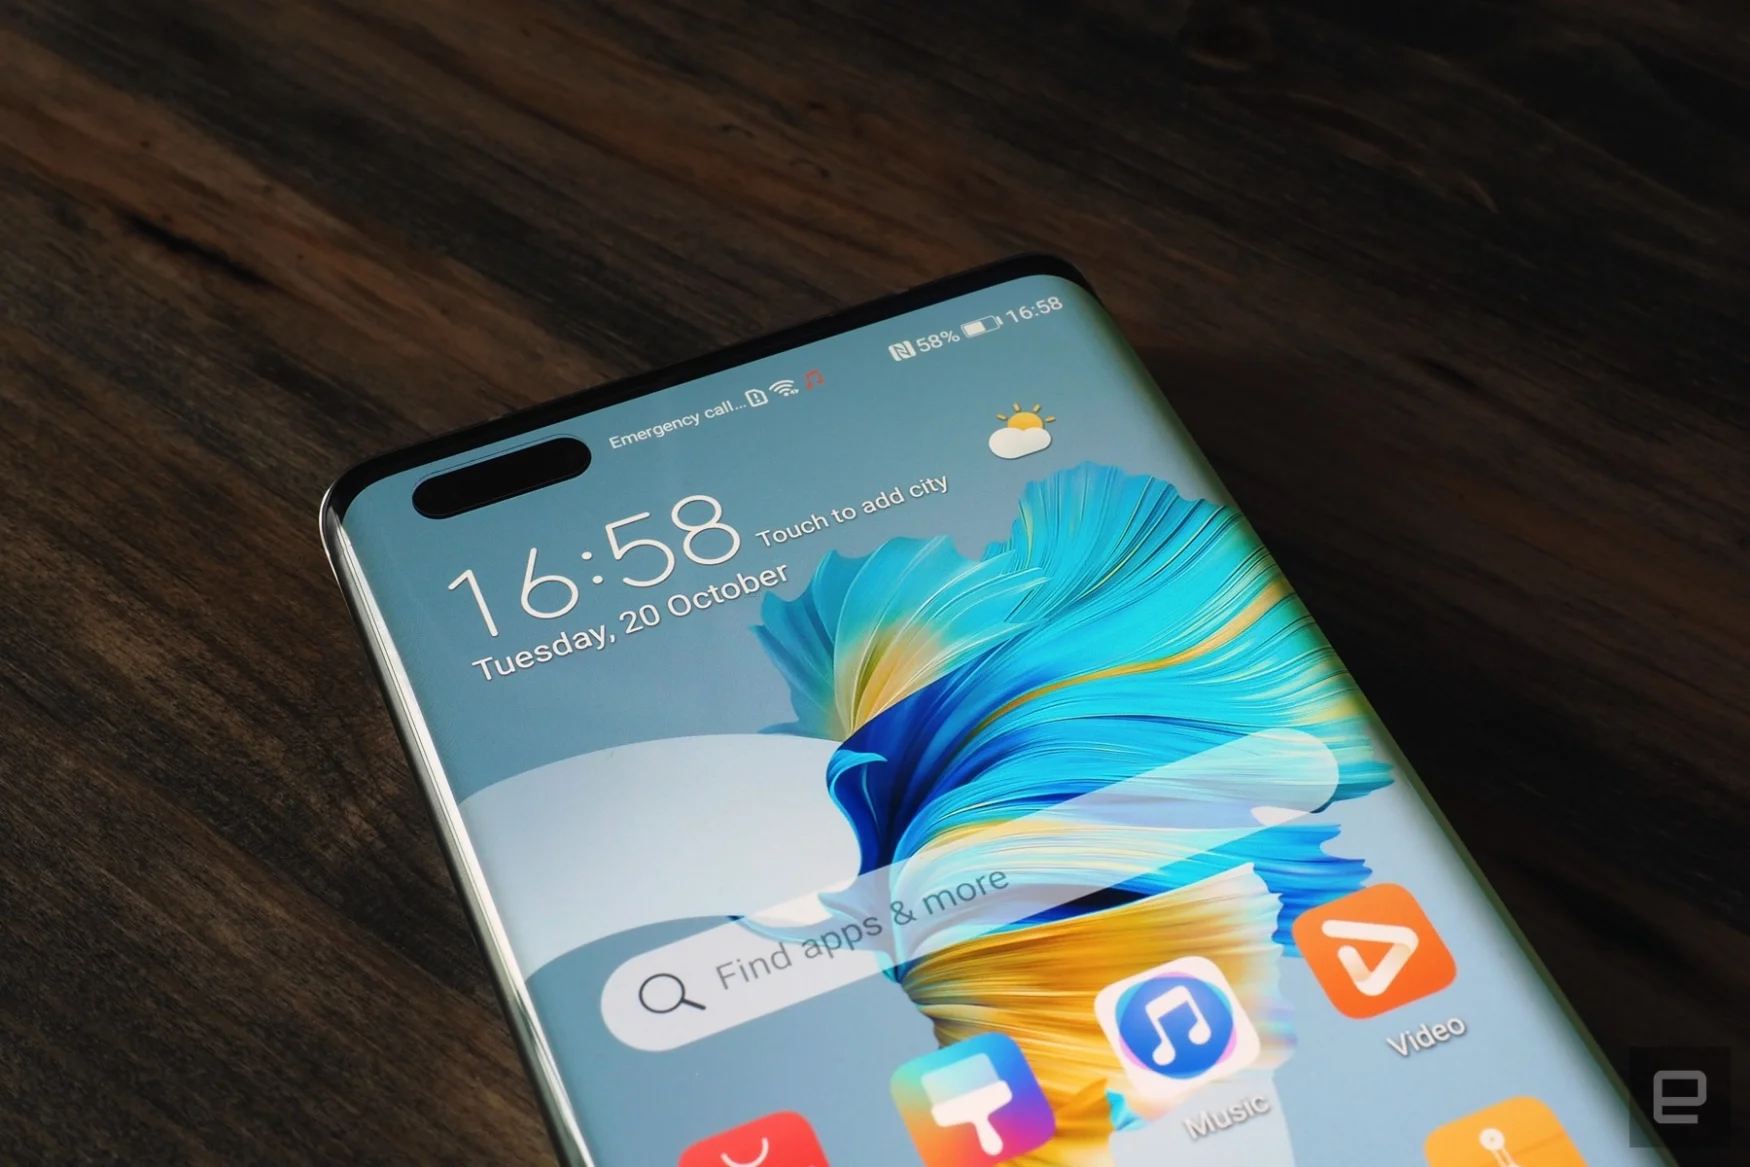 Hands-on images of Huawei’s latest flagship smartphone the Mate 40 Pro running EMUI 11 and packing incredible cameras.